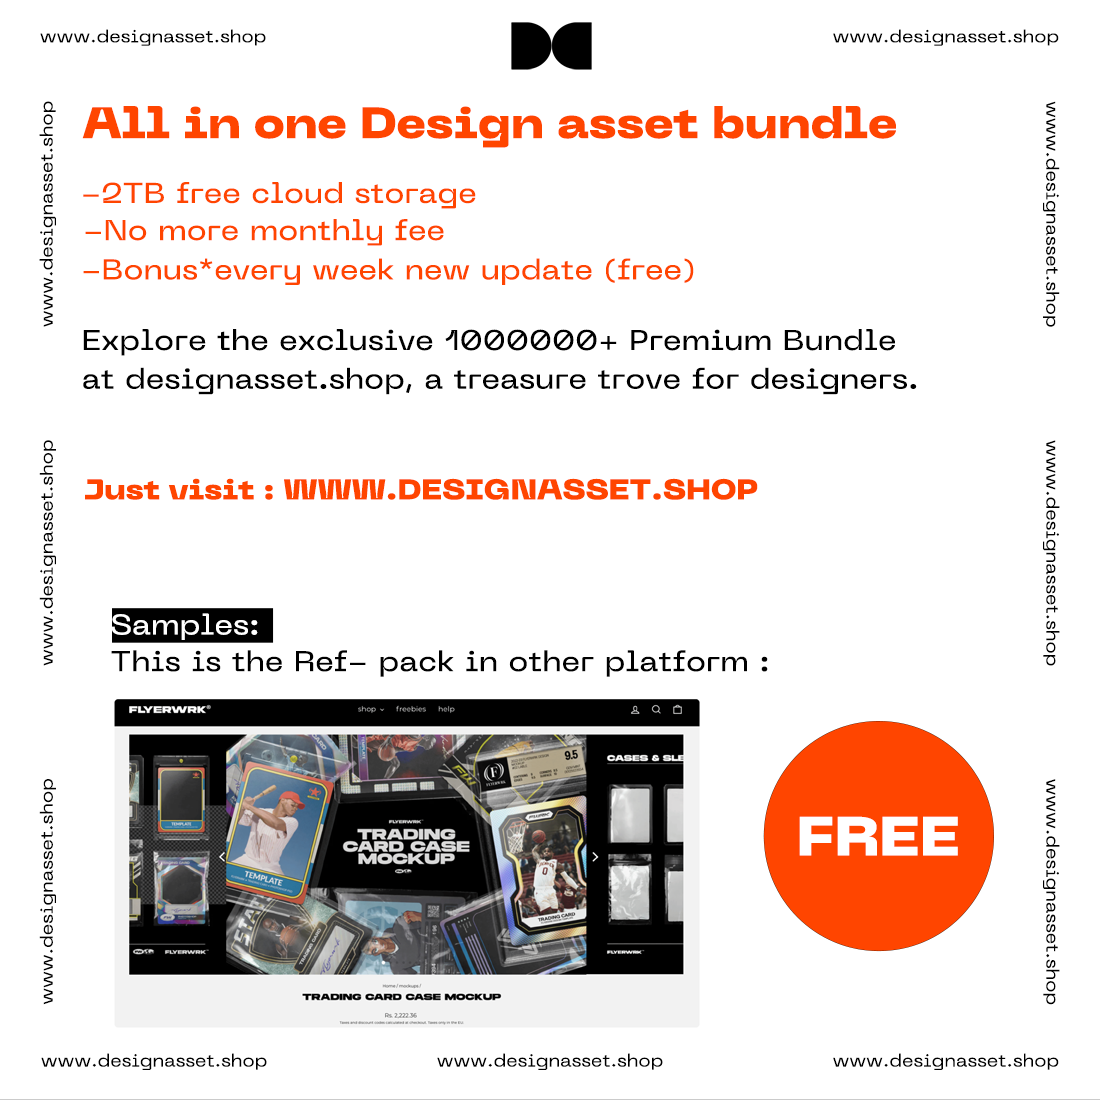 All in one Design asset bundle with 2TB free cloud storage and no more monthly fee #designasset preview image.